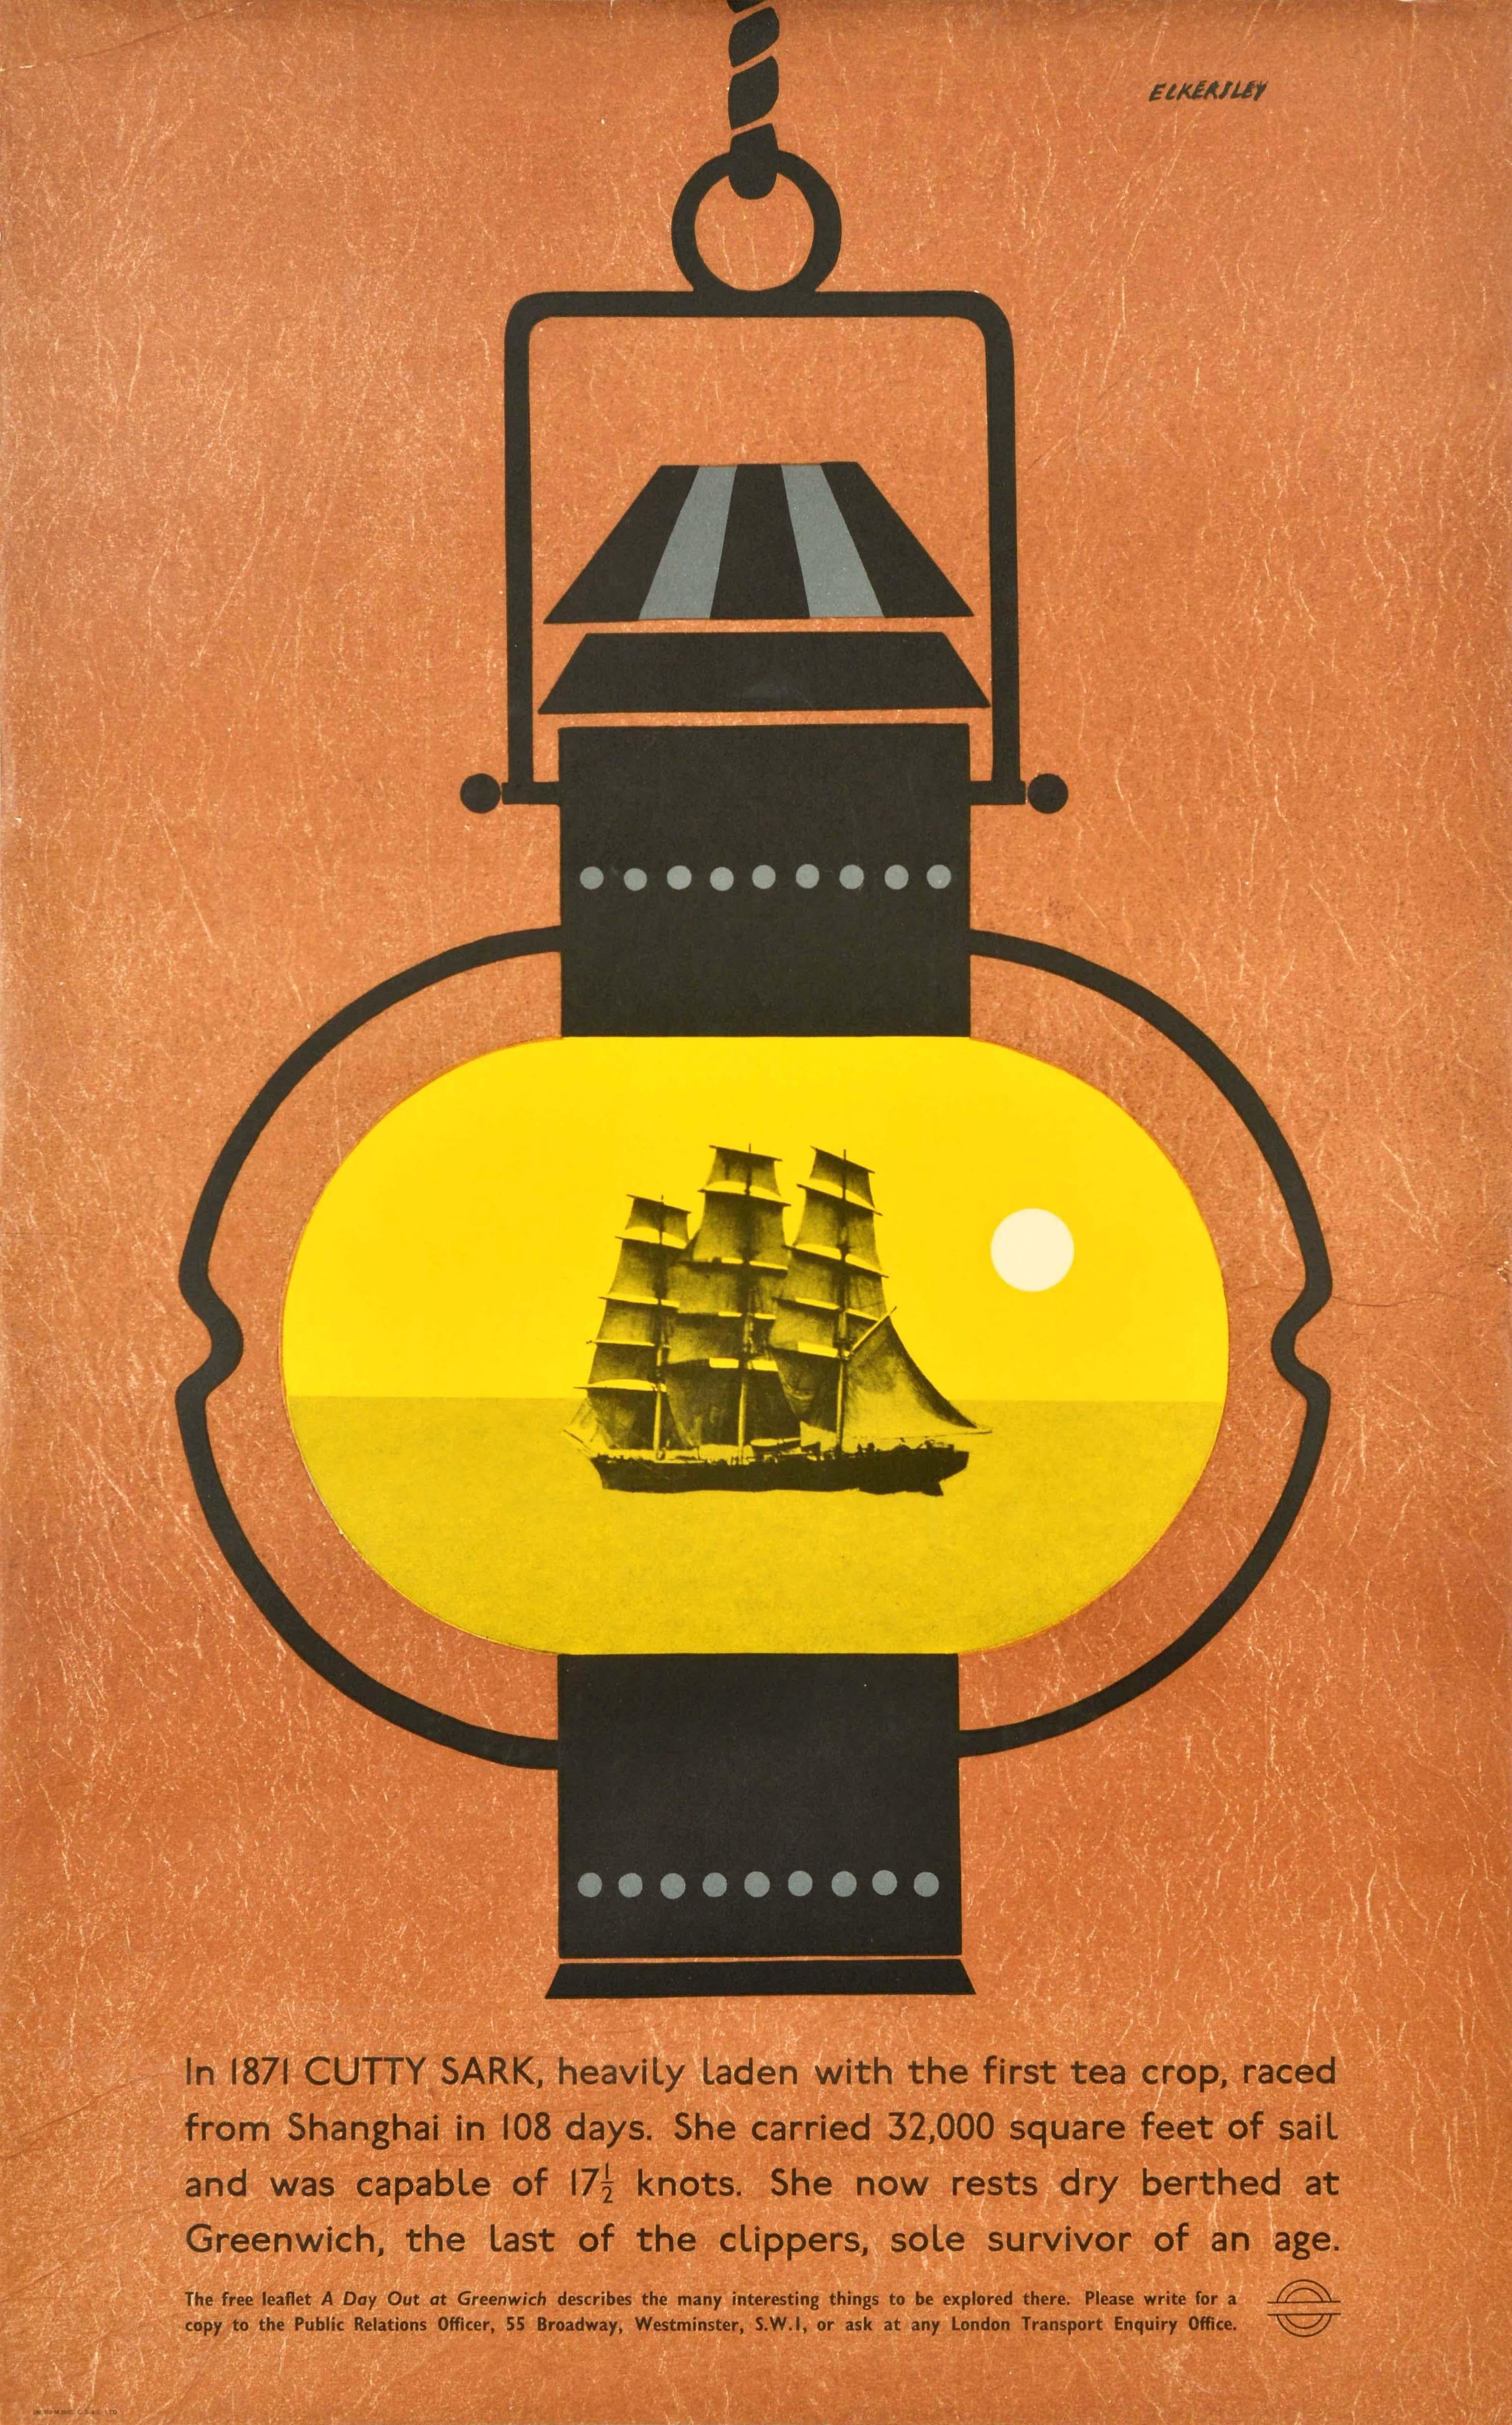 Original vintage London Transport poster advertising the historic Cutty Sark museum ship in Greenwich featuring a great design by the notable artist Tom Eckersley (1914-1997) depicting the iconic tea clipper in full sail against a yellow background